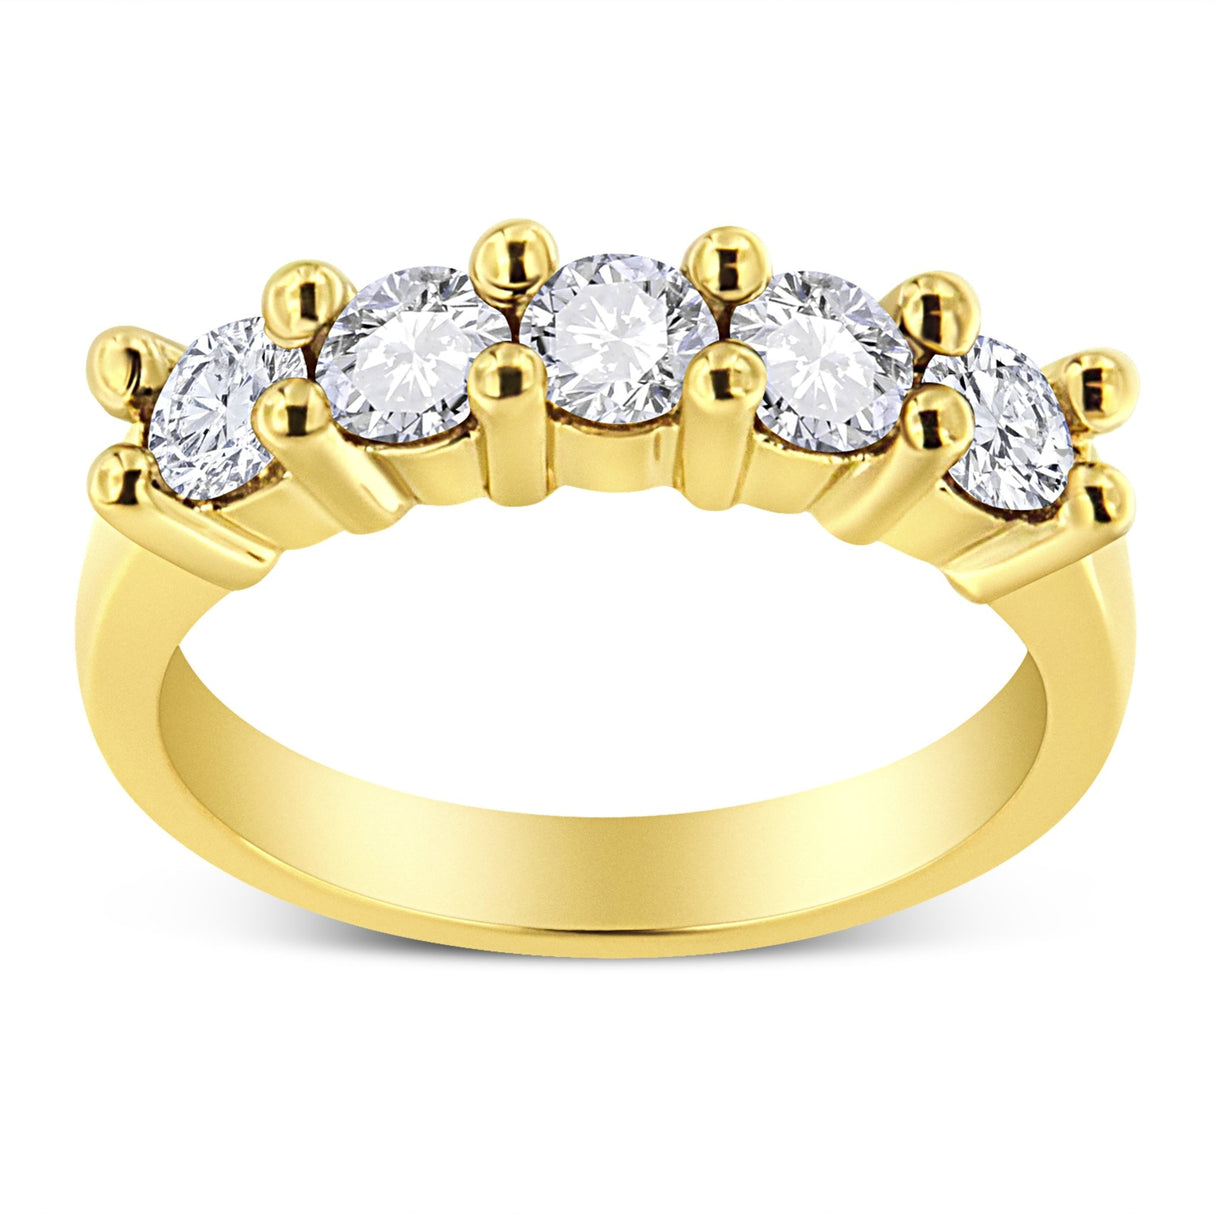 14K Yellow Gold Plated .925 Sterling Silver 1.0 Cttw Shared Prong-Set Round Diamond 5 Stone Band Ring (J-K Color, I1-I2 Clarity) - Size 8 - Tuesday Morning-Rings